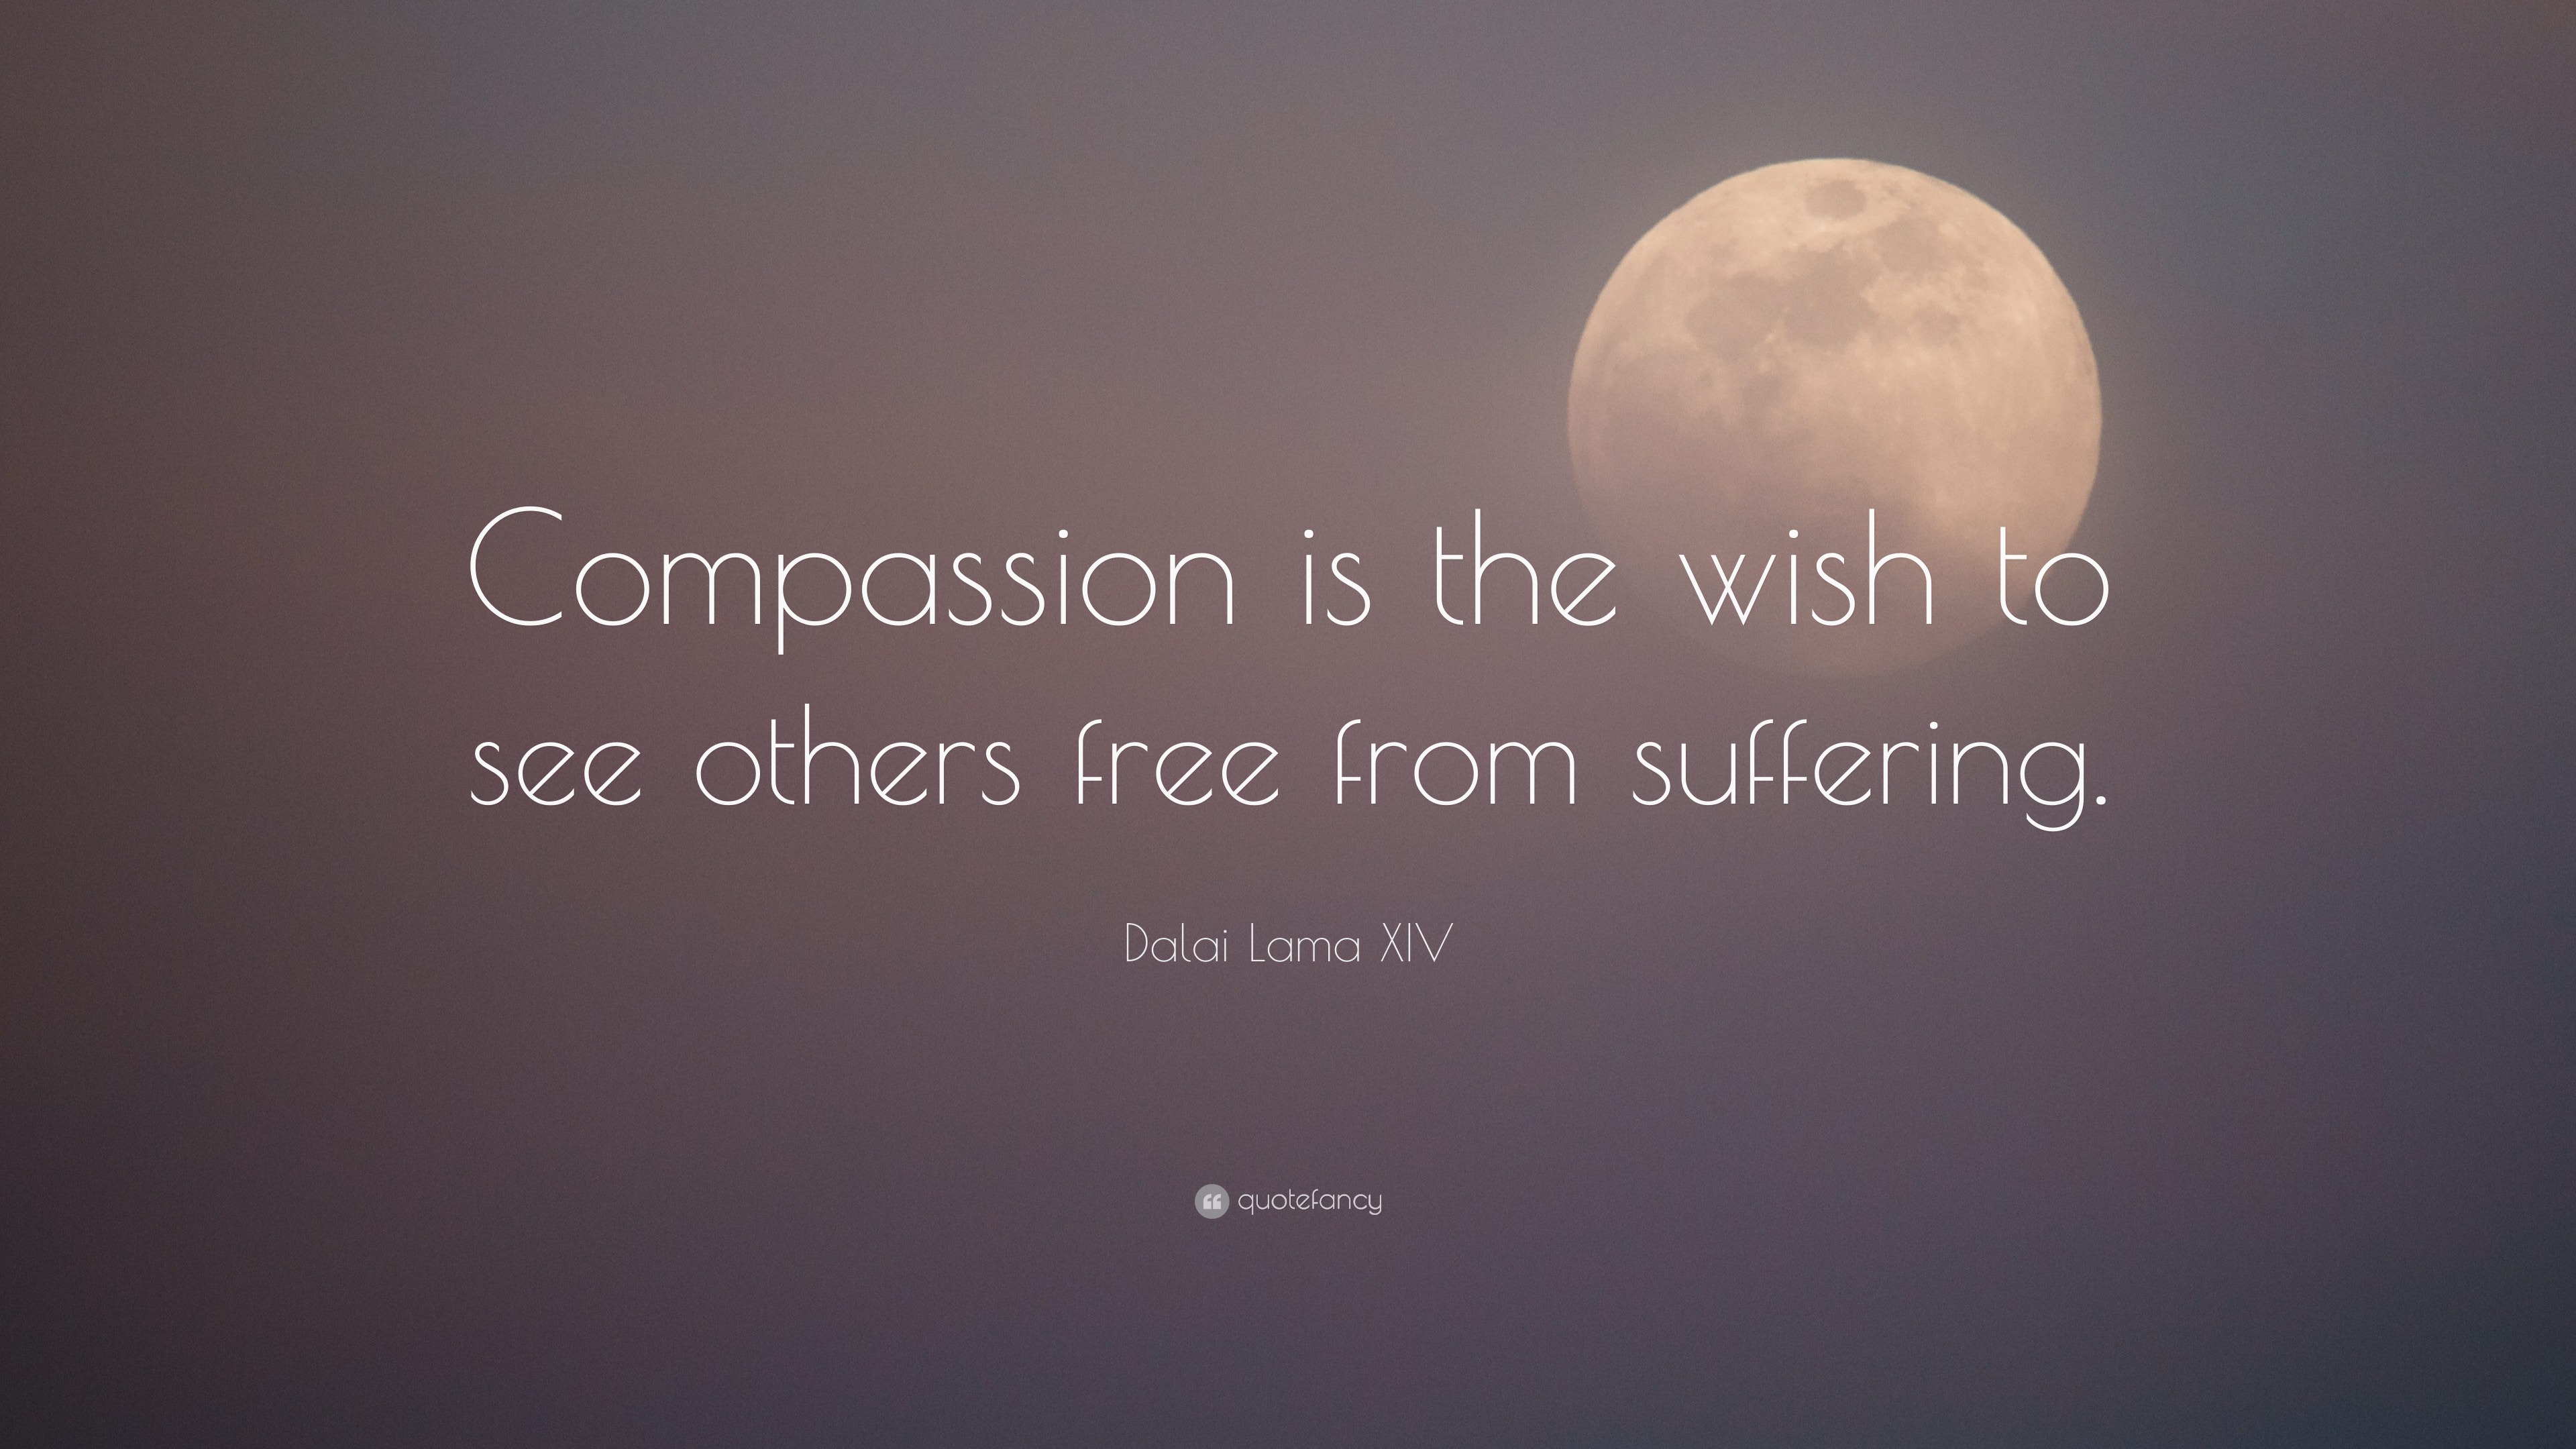 Dalai Lama XIV Quote: “Compassion is the wish to see others free from